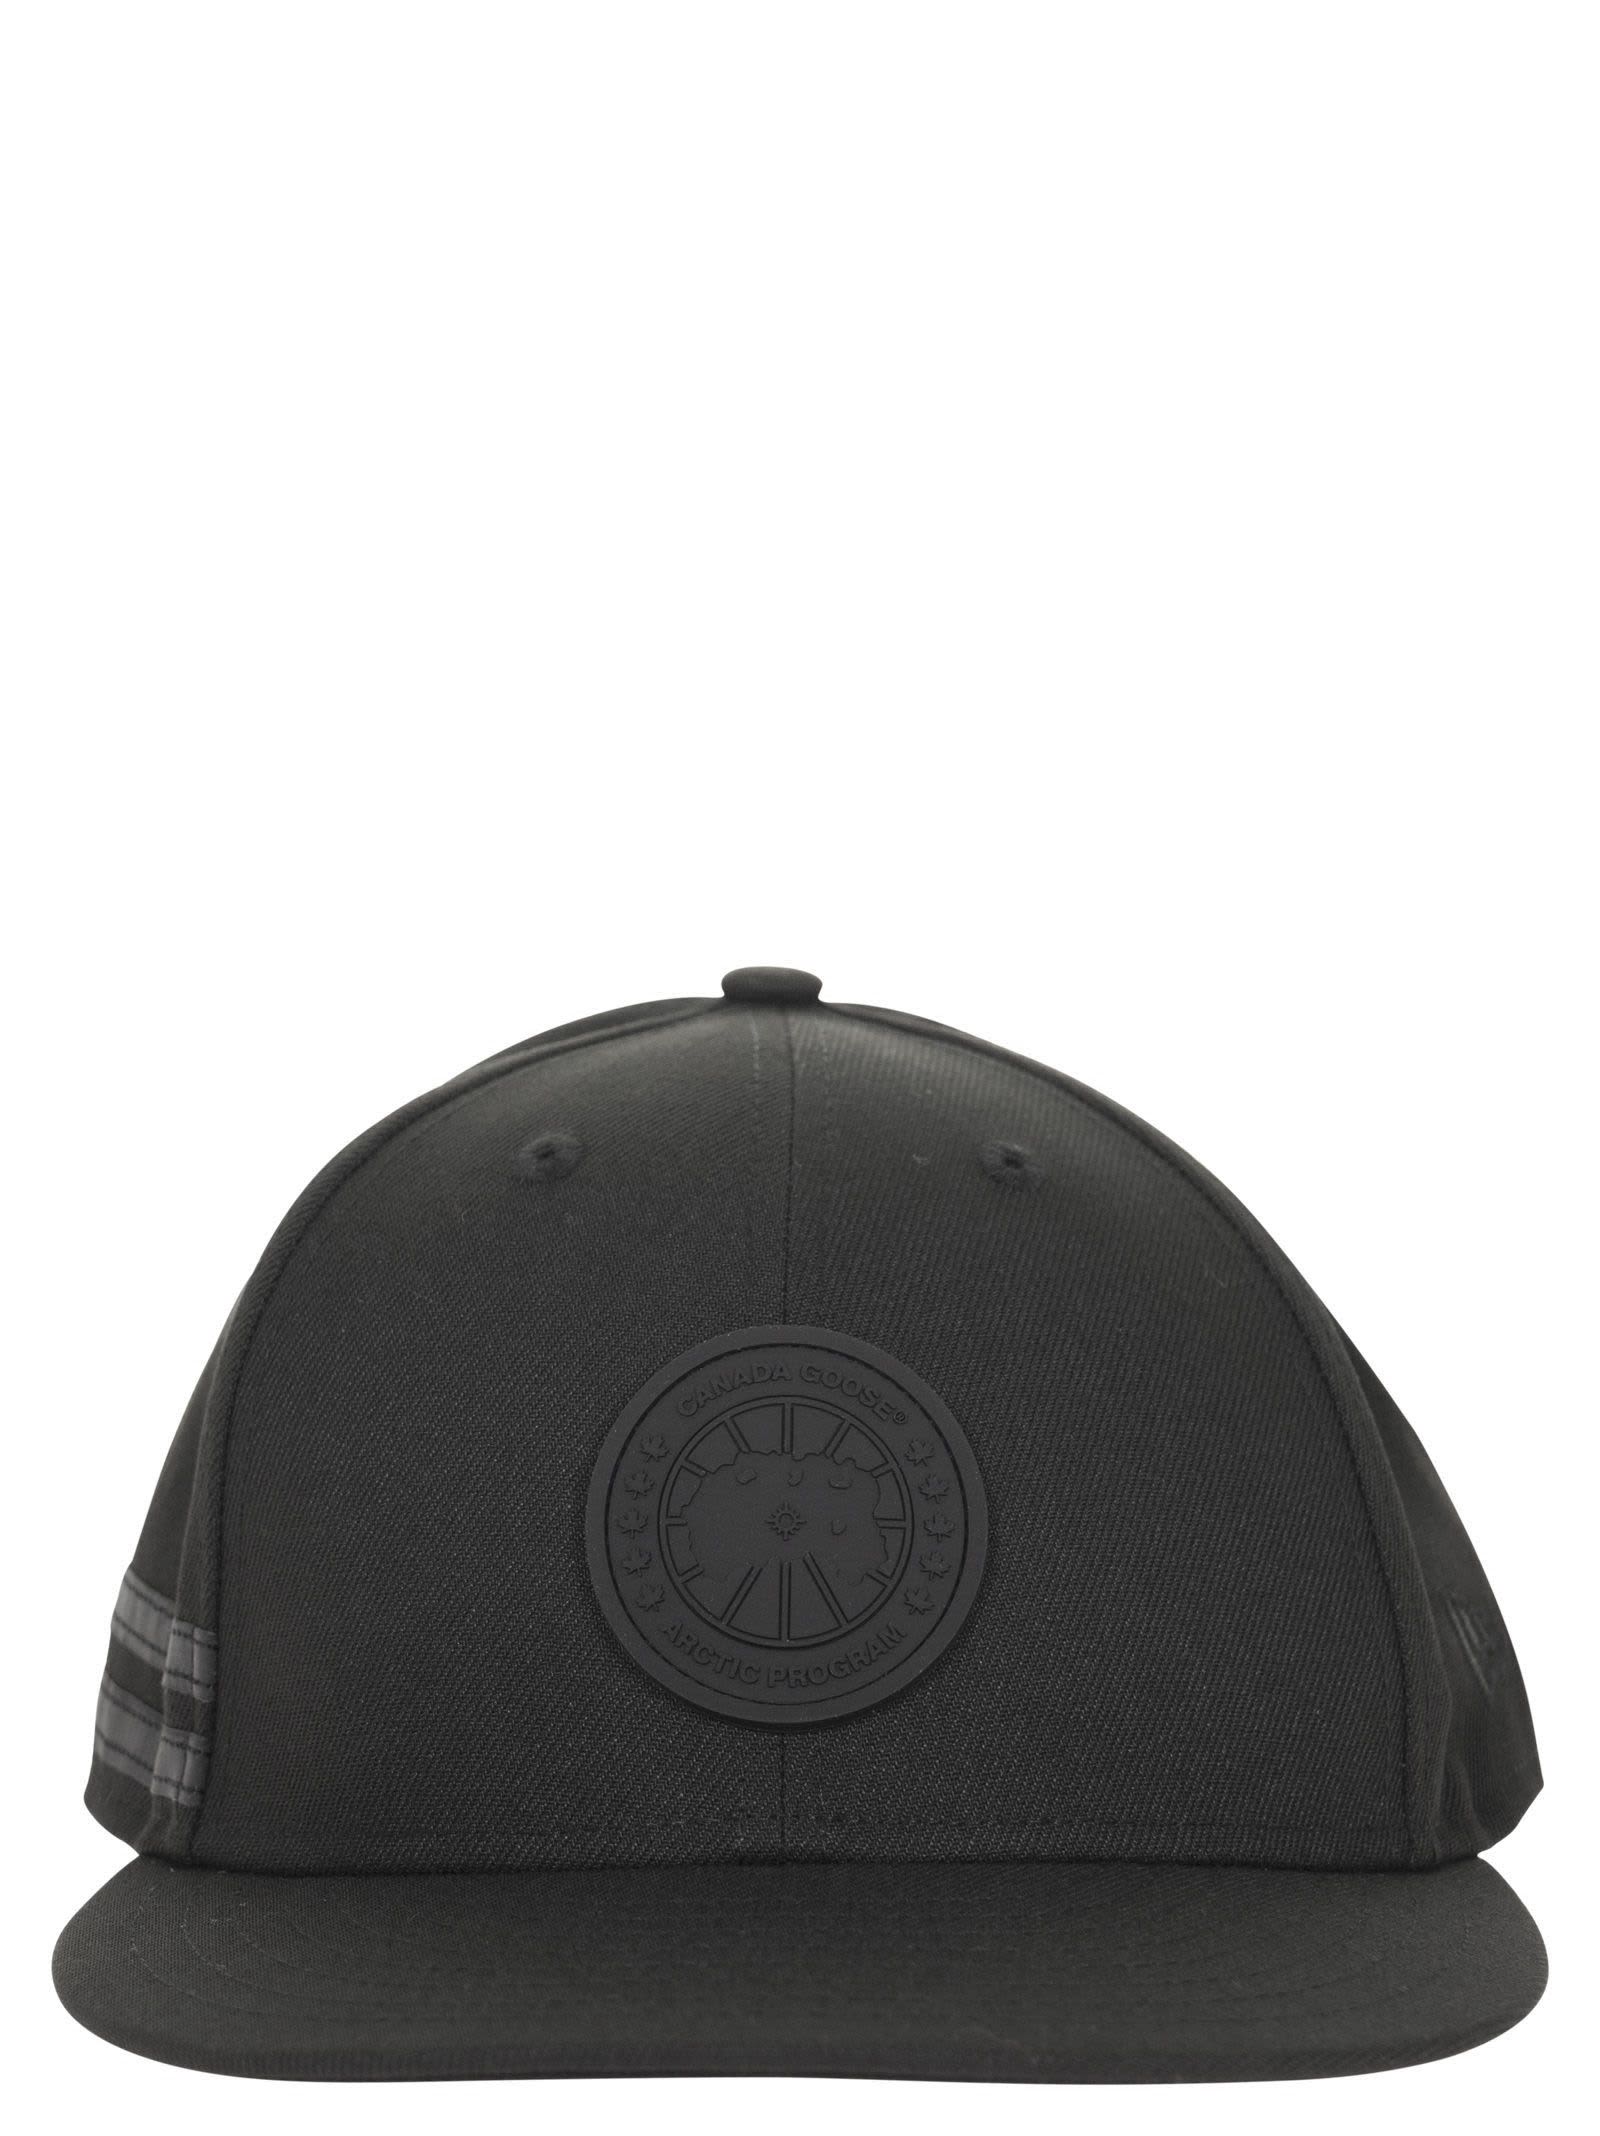 Canada Goose Snapback - Hat With Visor